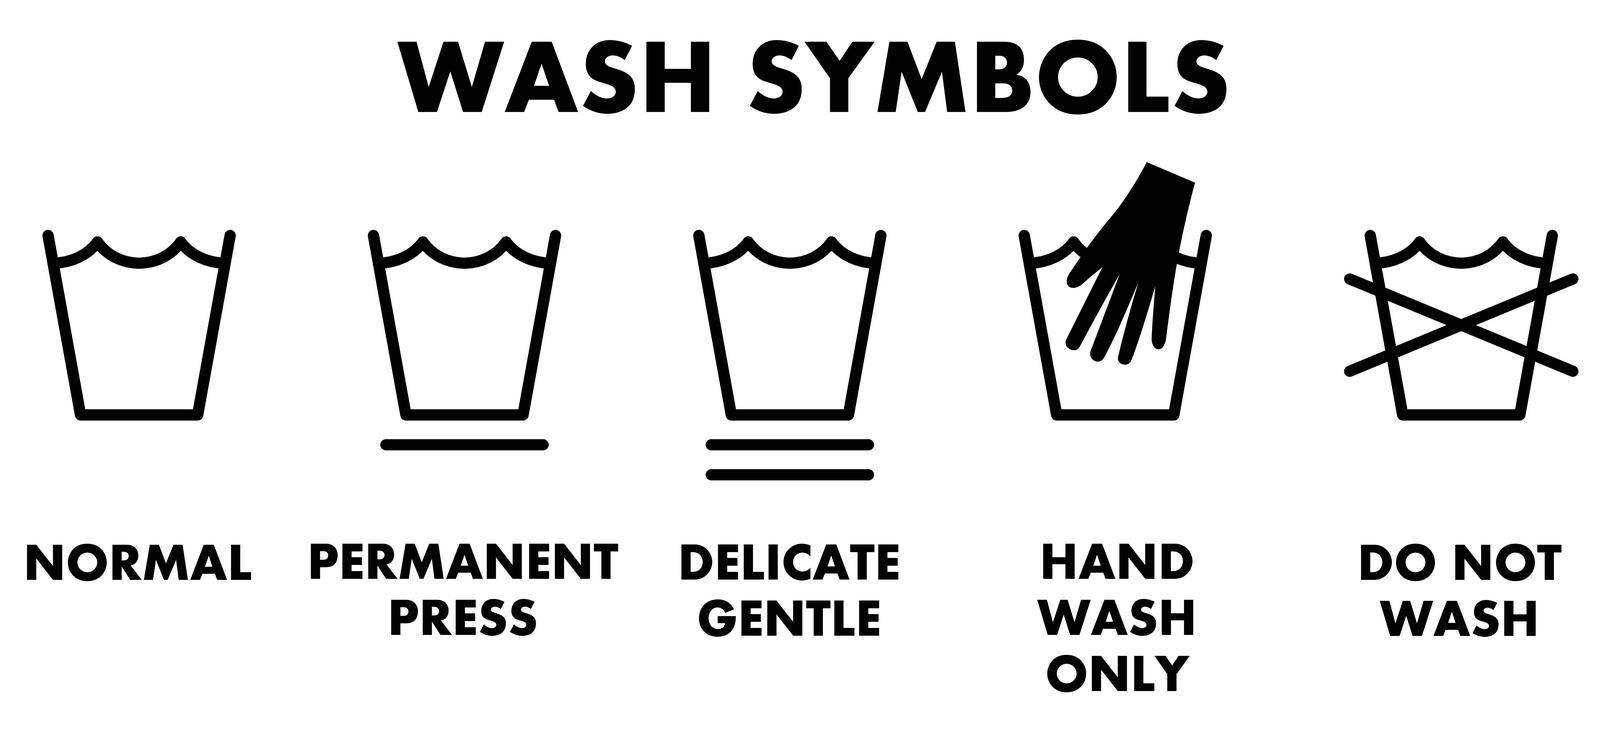 Laundry washing symbols, icons for different type of wash. by Ivanko